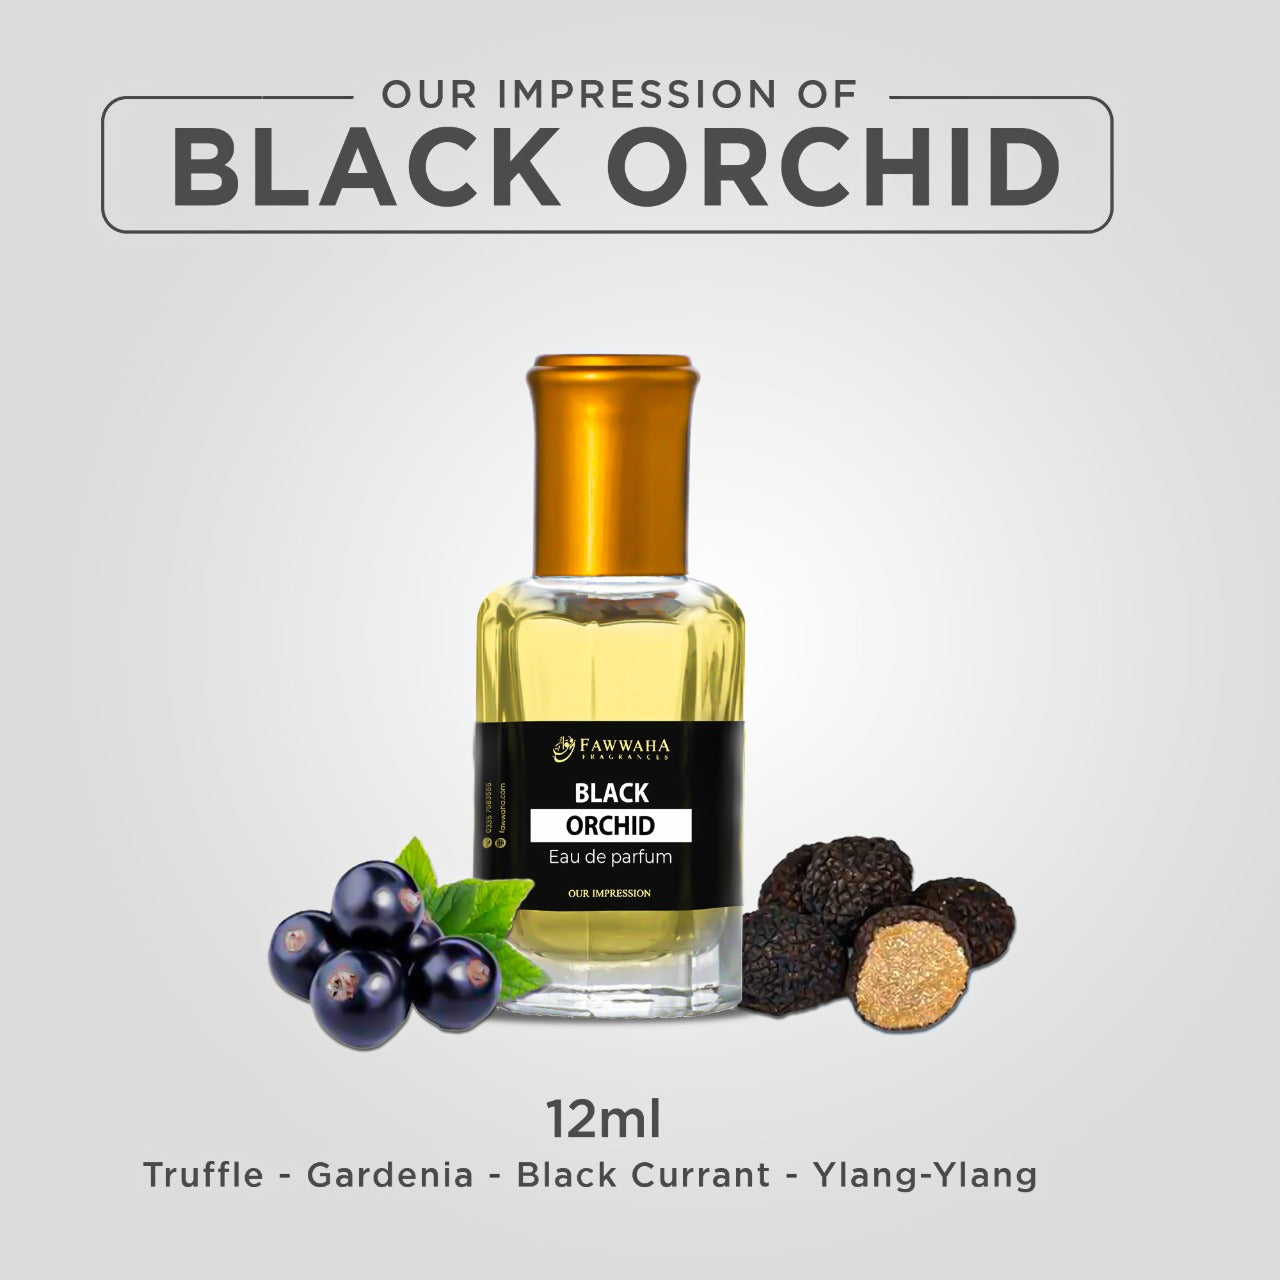 OUR IMPRESSION OF BLACK ORCHID